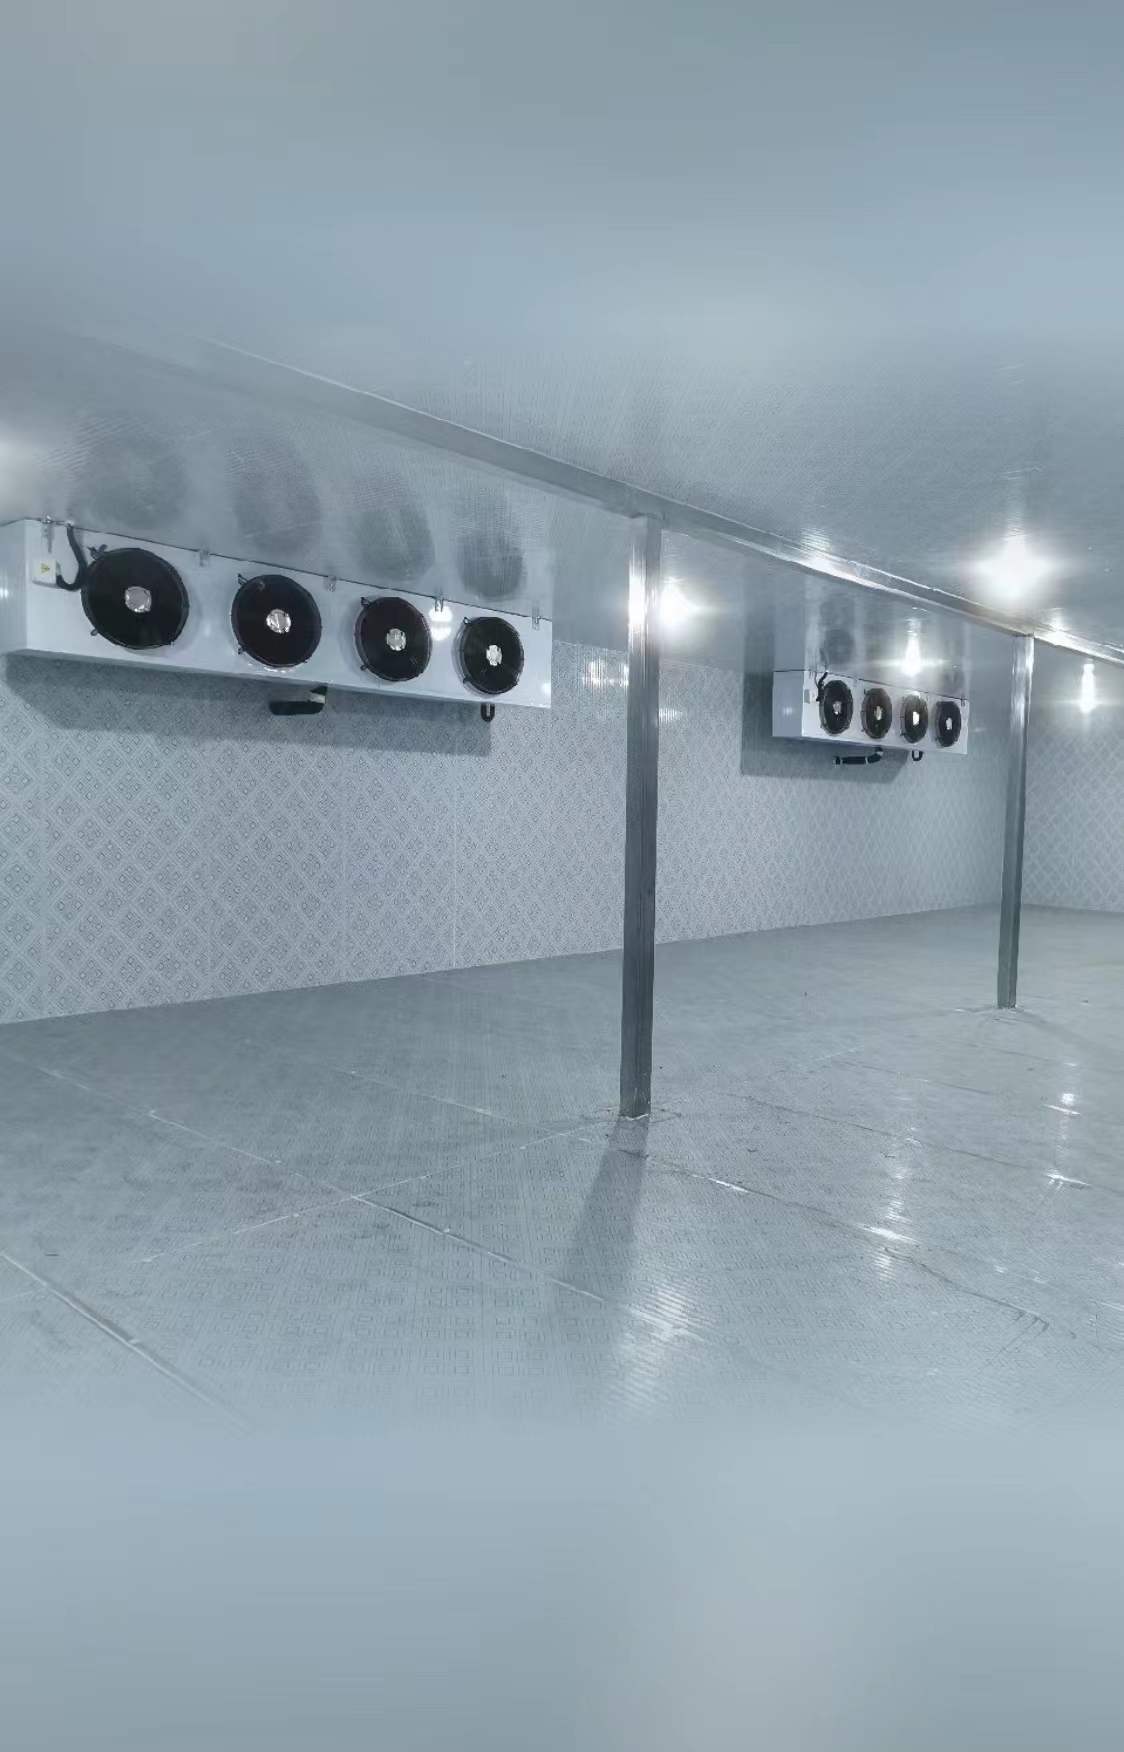 What factors affect the cooling of cold storage?